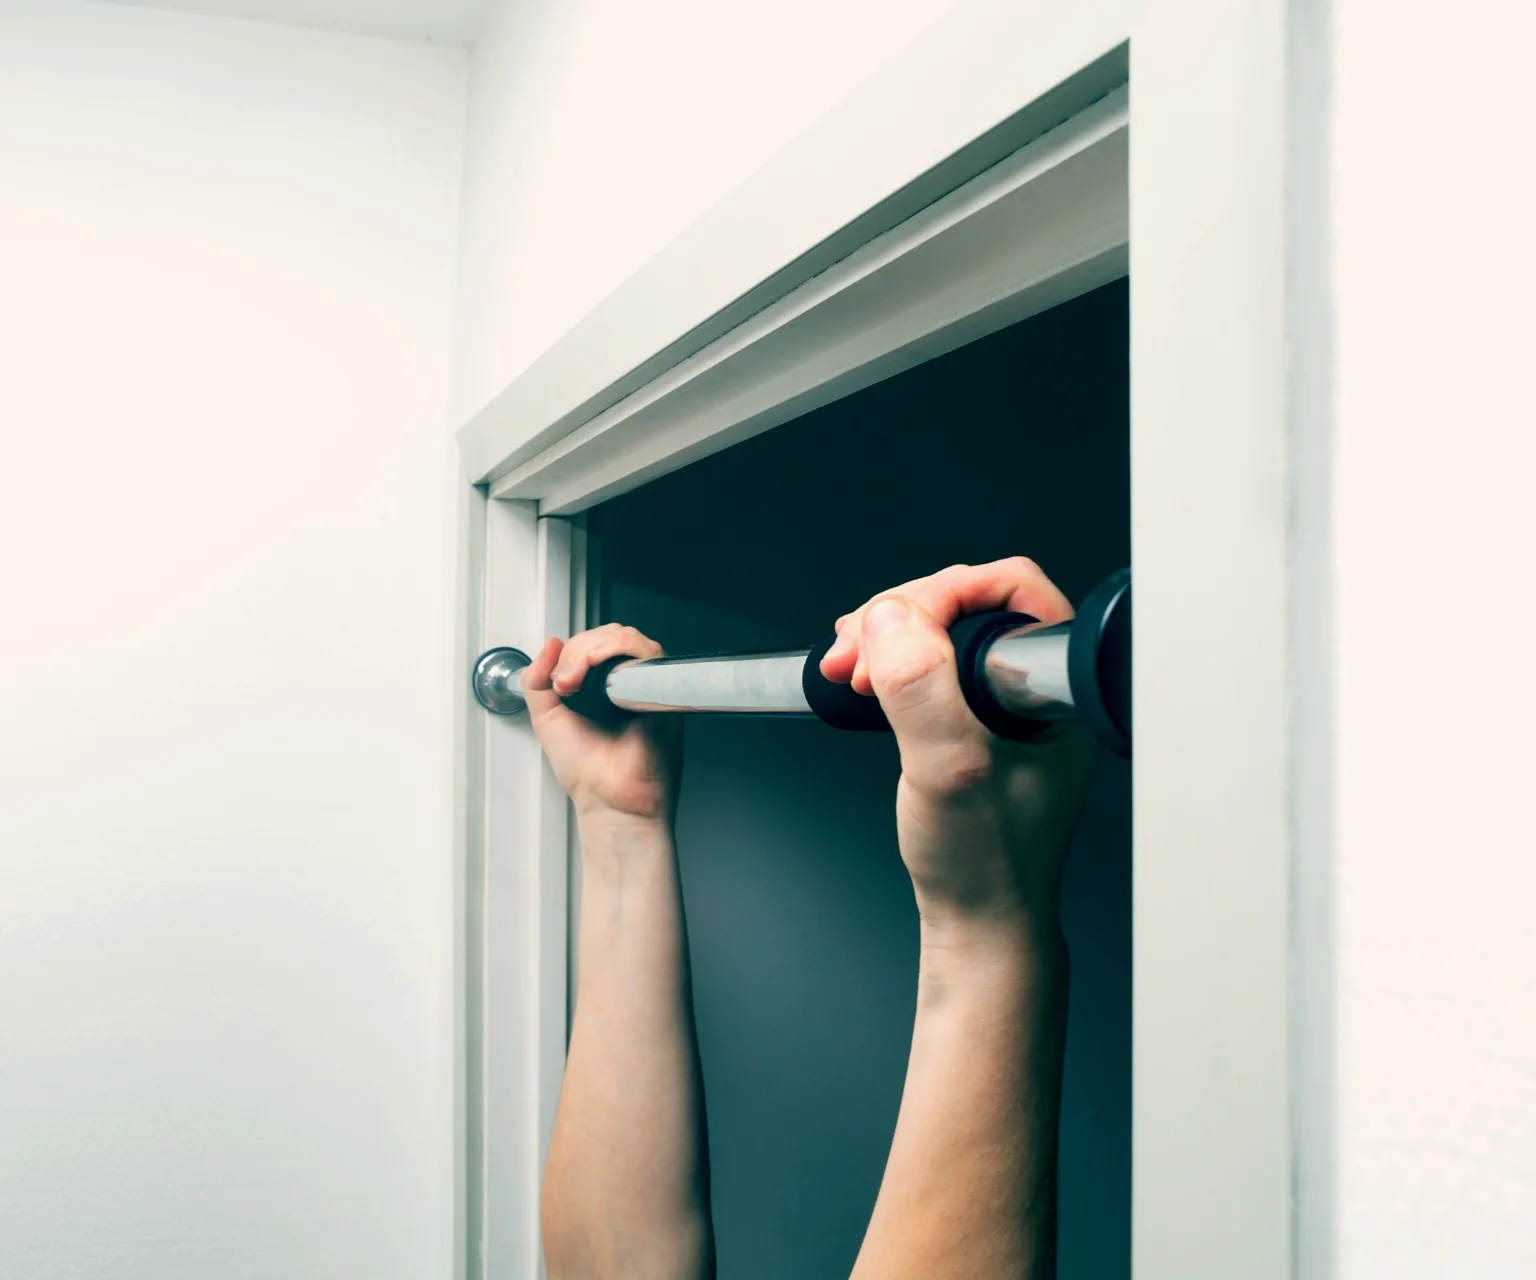 photo - Door frame with a pull-up bar attached.